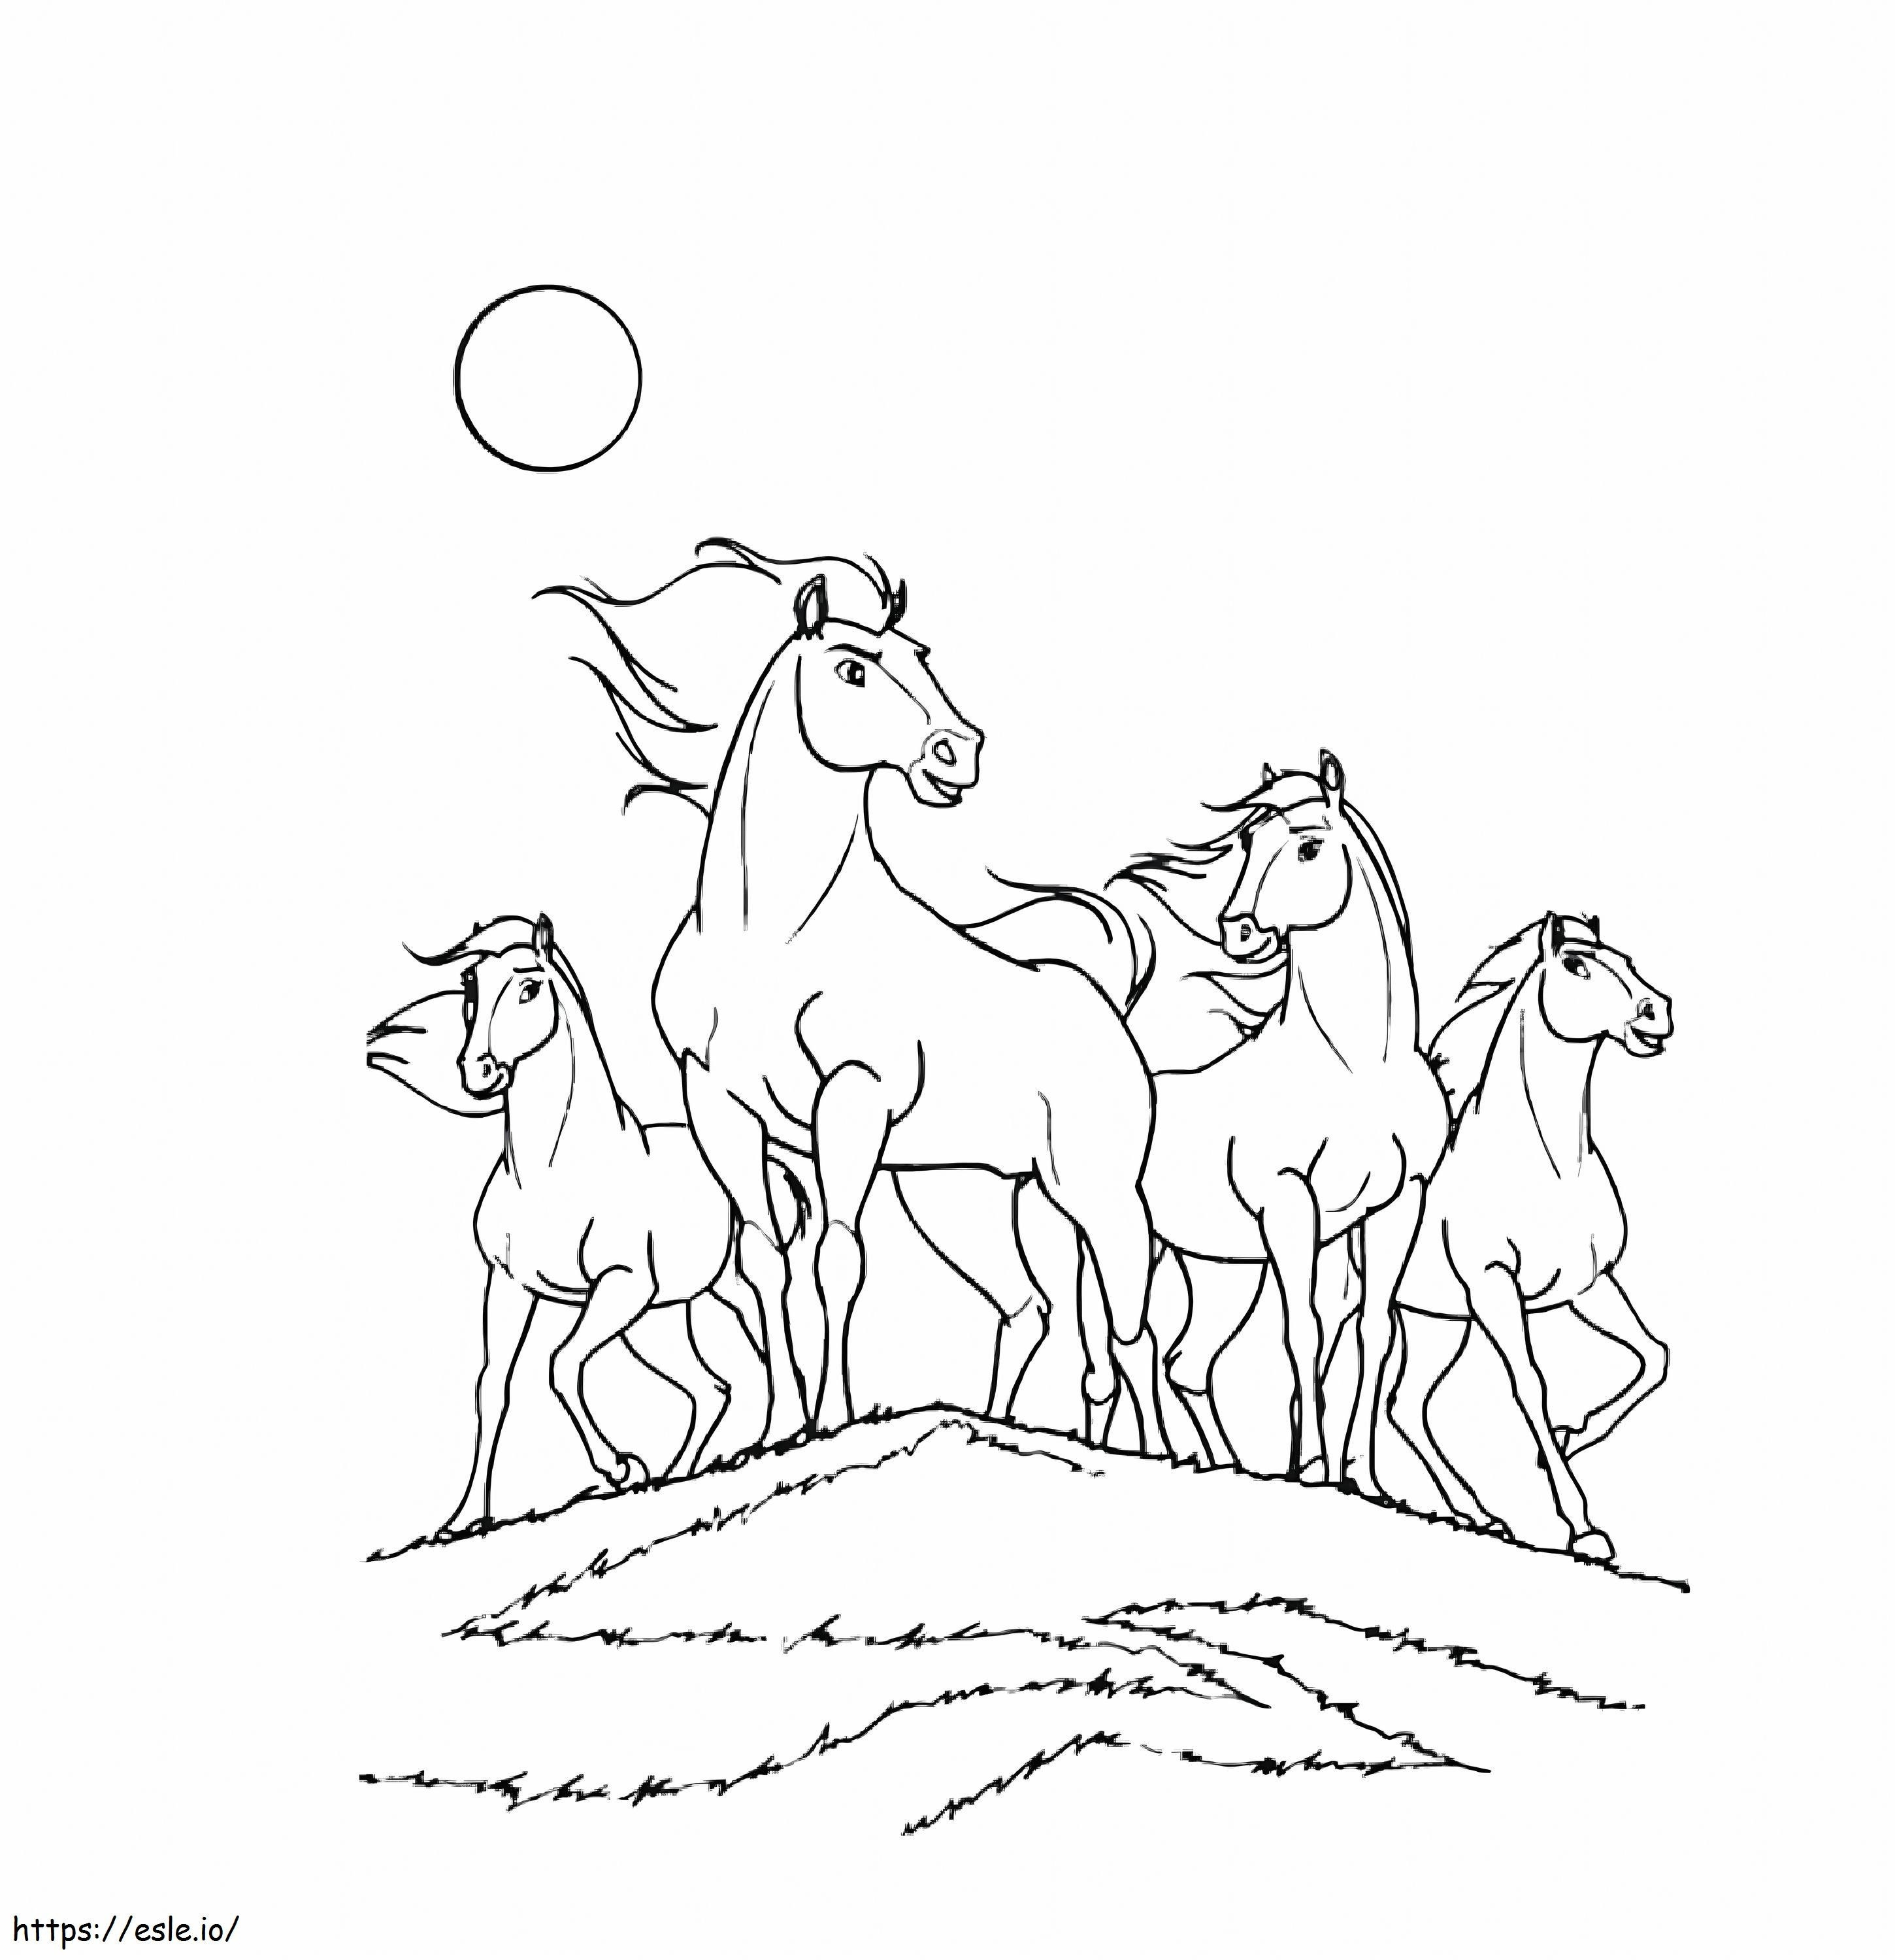 Free Spiritual Coloring Image For Children To Color coloring page